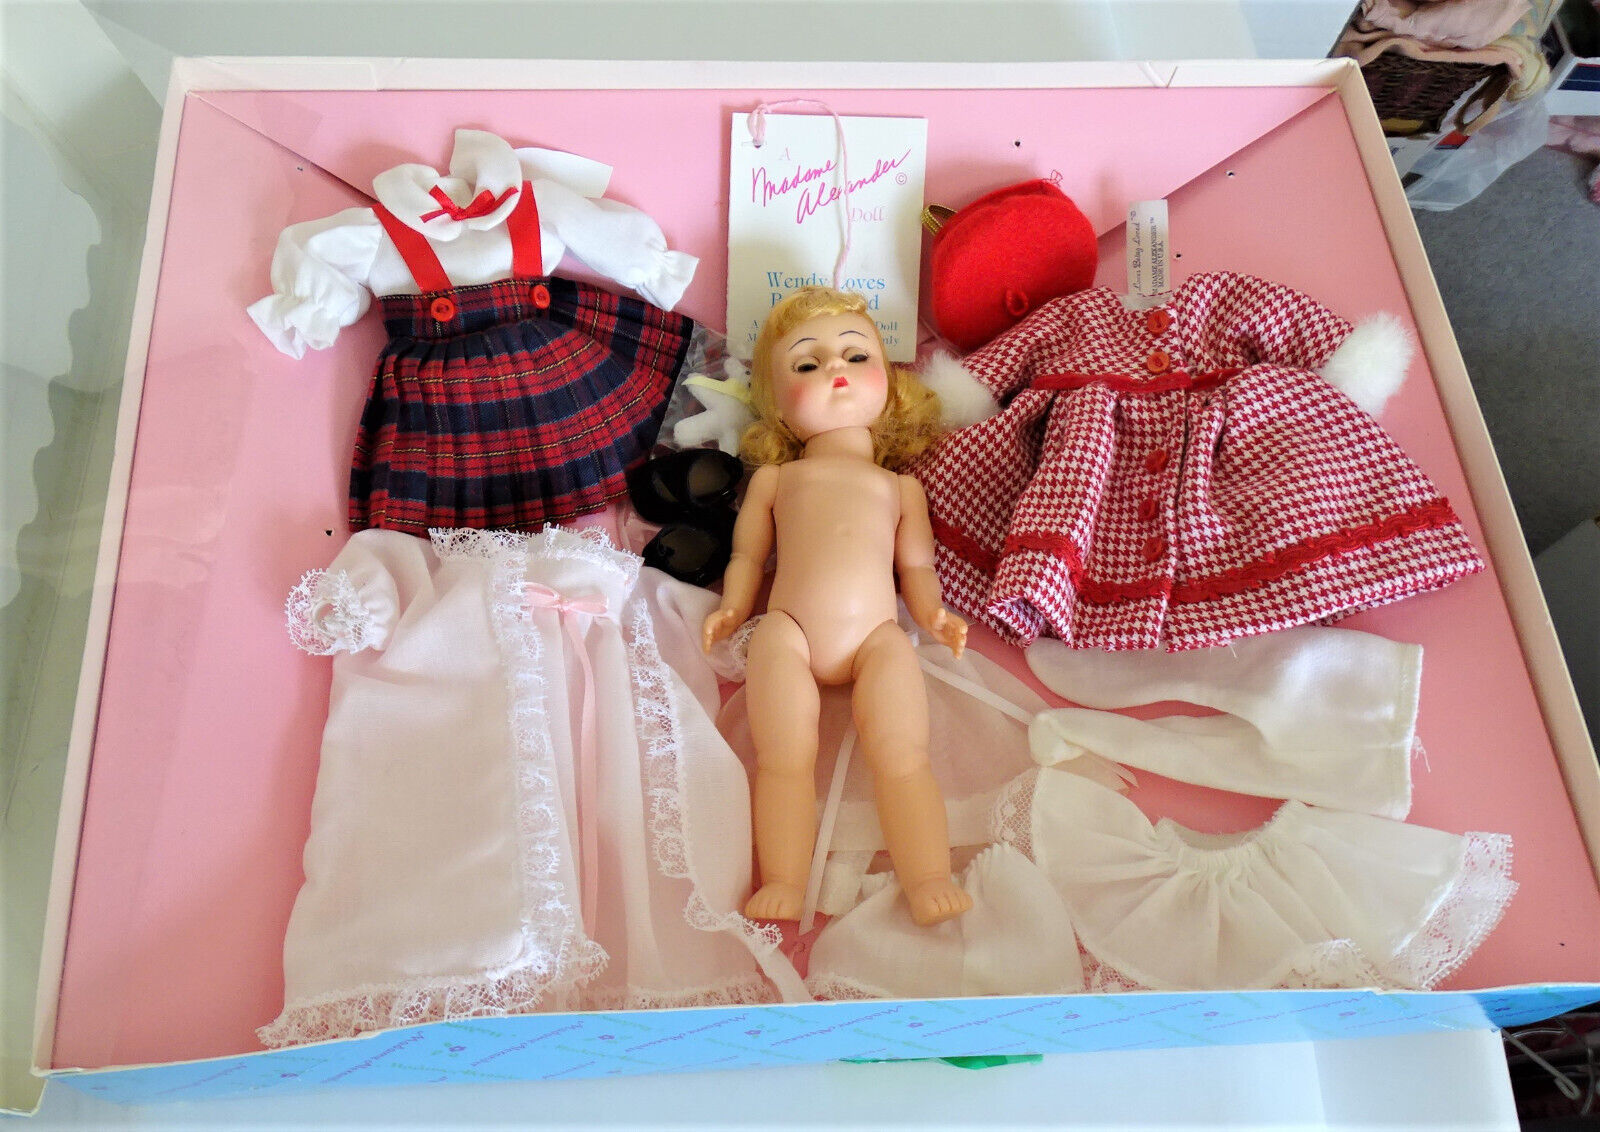 1992 Alexander 8"Wendy Loves Being Loved Gift Set w/ Clothes & Acces. Ltd. Ed. - $48.99